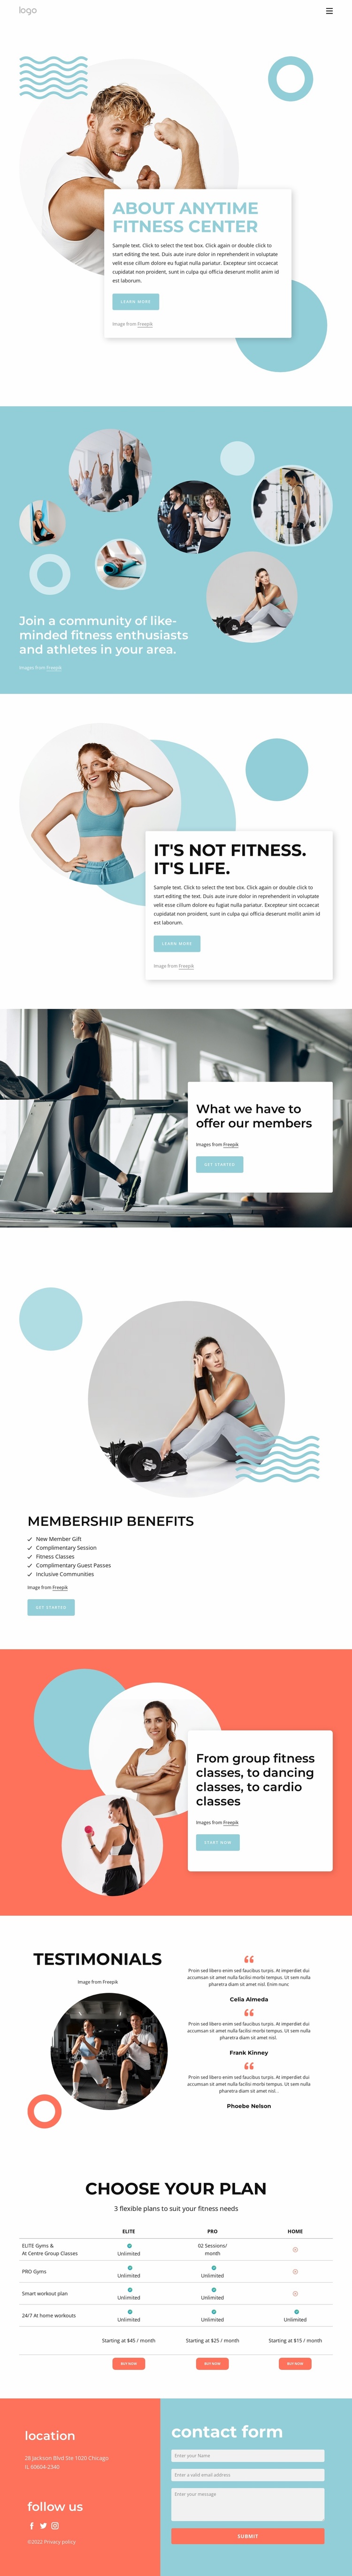 About Anytime fitness center eCommerce Template